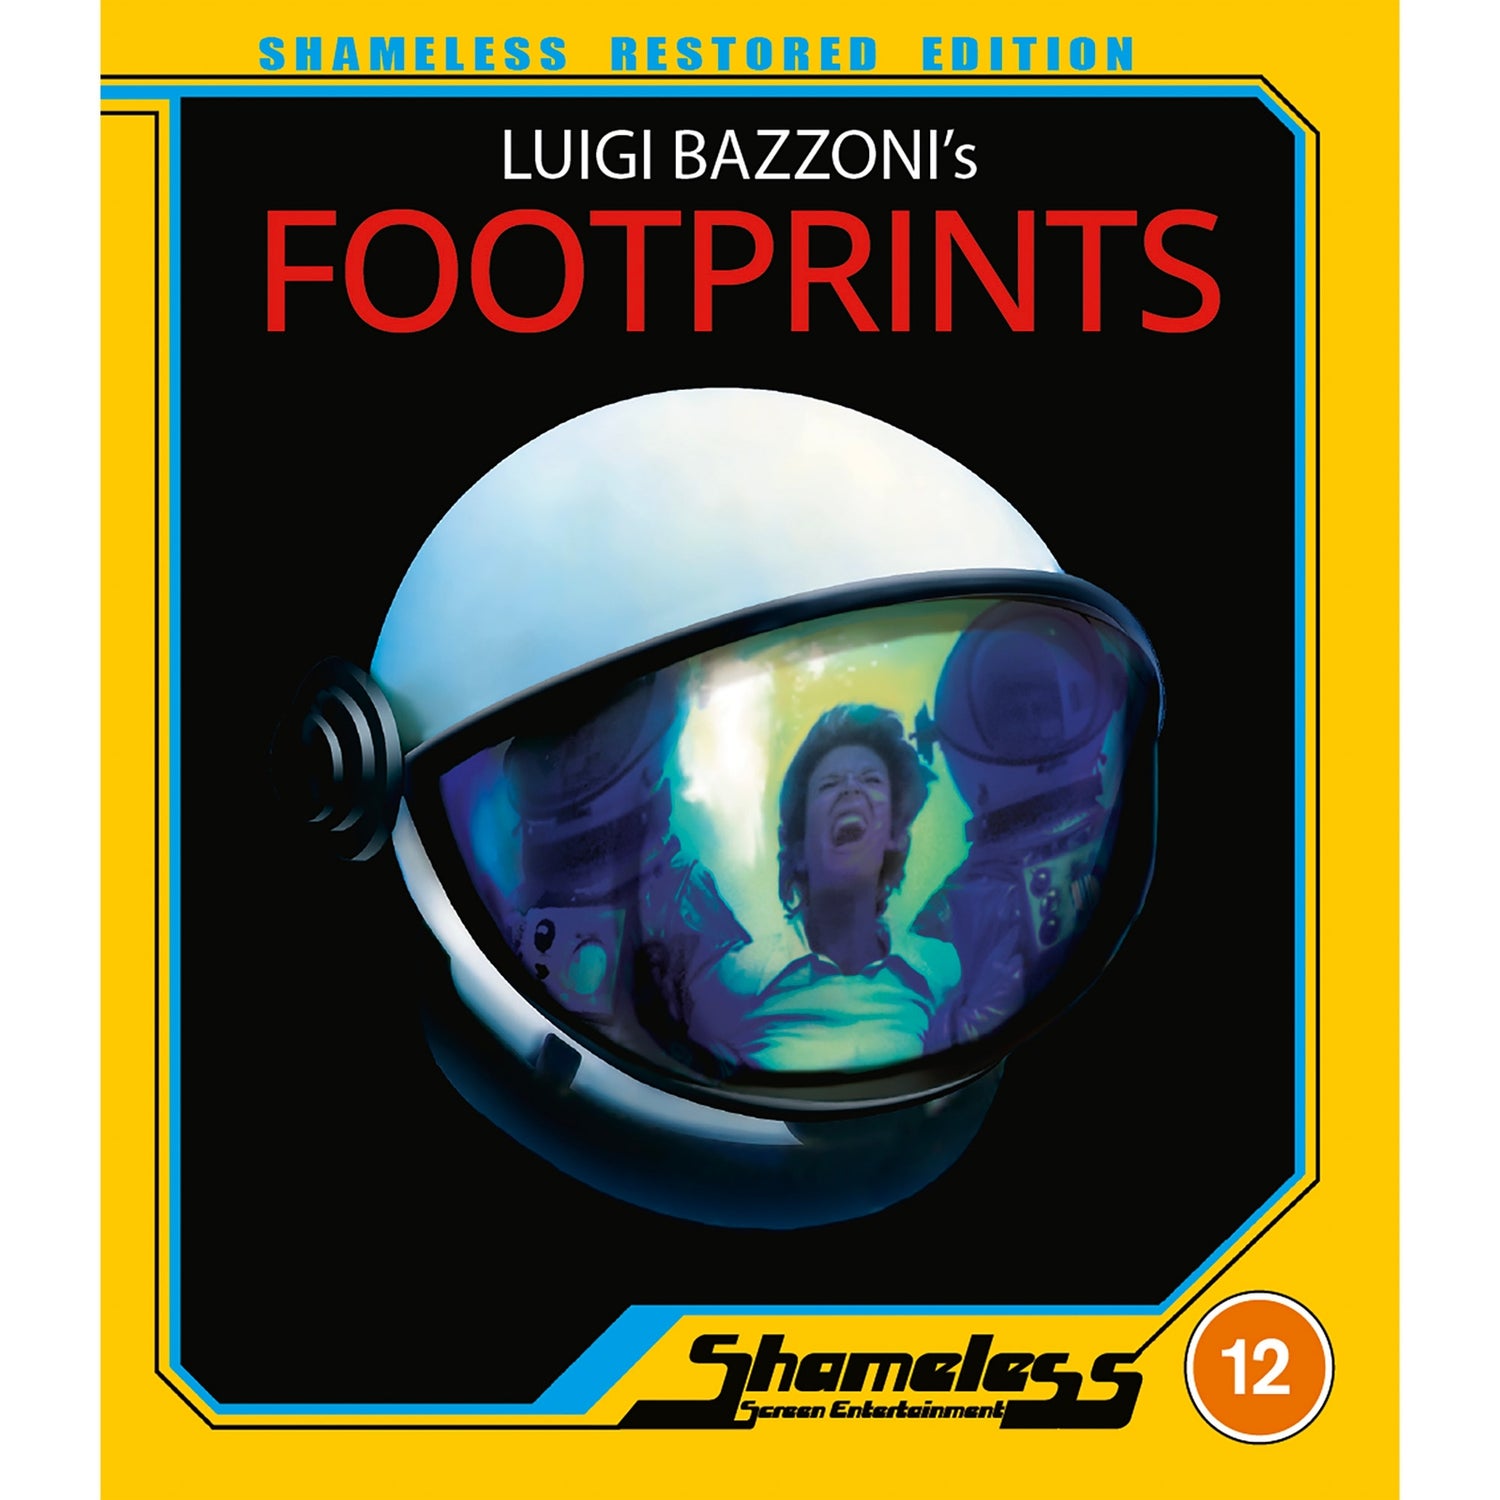 FOOTPRINTS ON THE MOON (Restored Limited Edition)